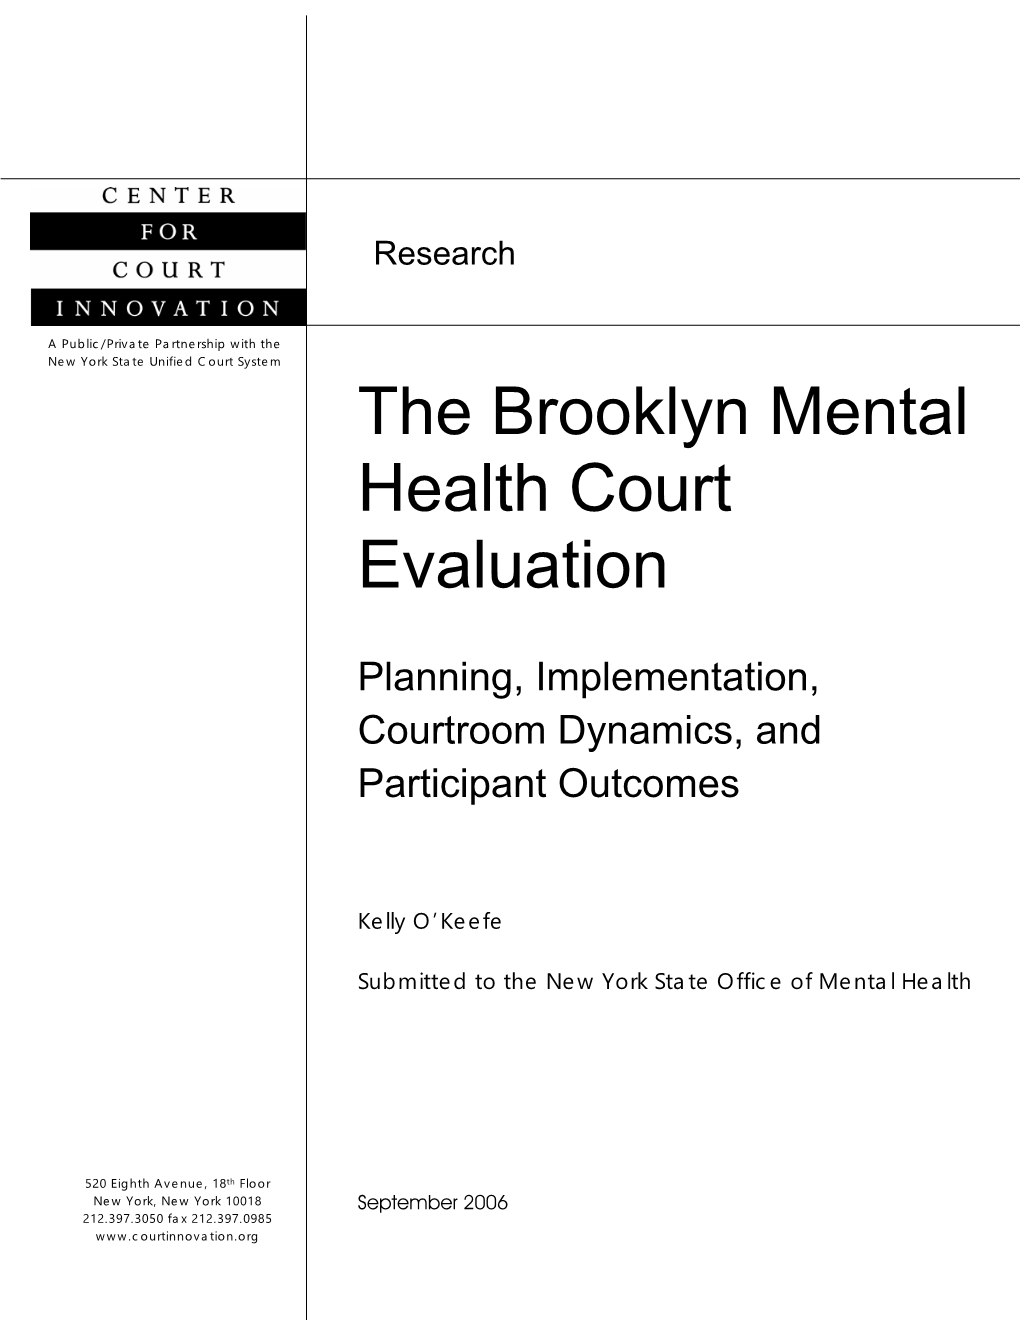 The Brooklyn Mental Health Court Evaluation